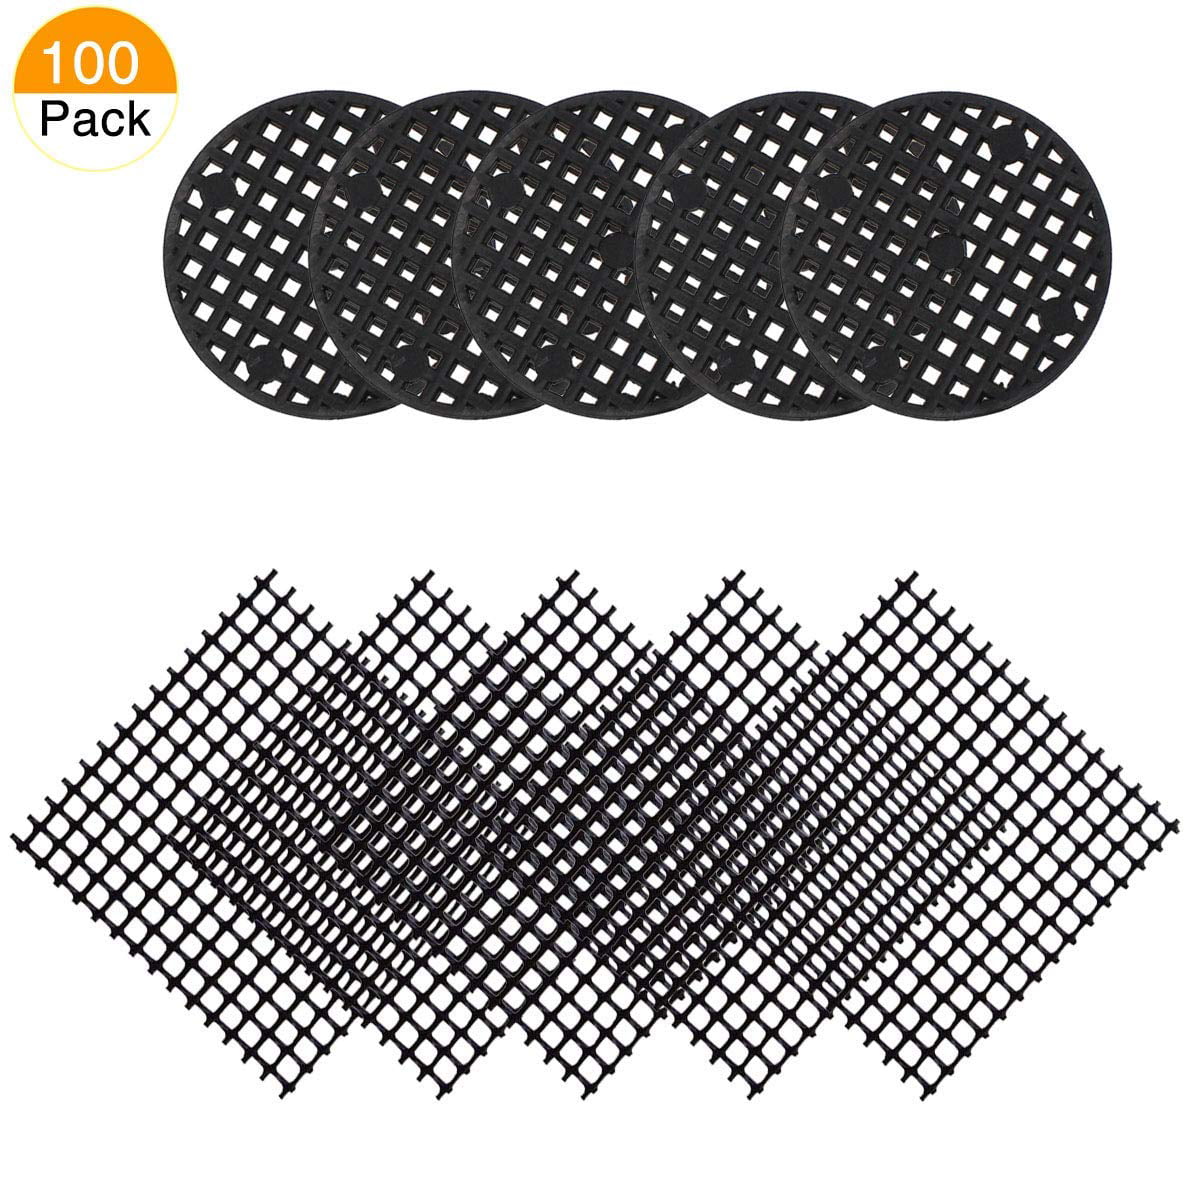 50 Pack 2x2 Inch Squares Gardens Drainage Mesh Hole Screens Prevent Soil Loss Anti LE TAUCI Flower Pot Hole Mesh Pad Polyamide Material 